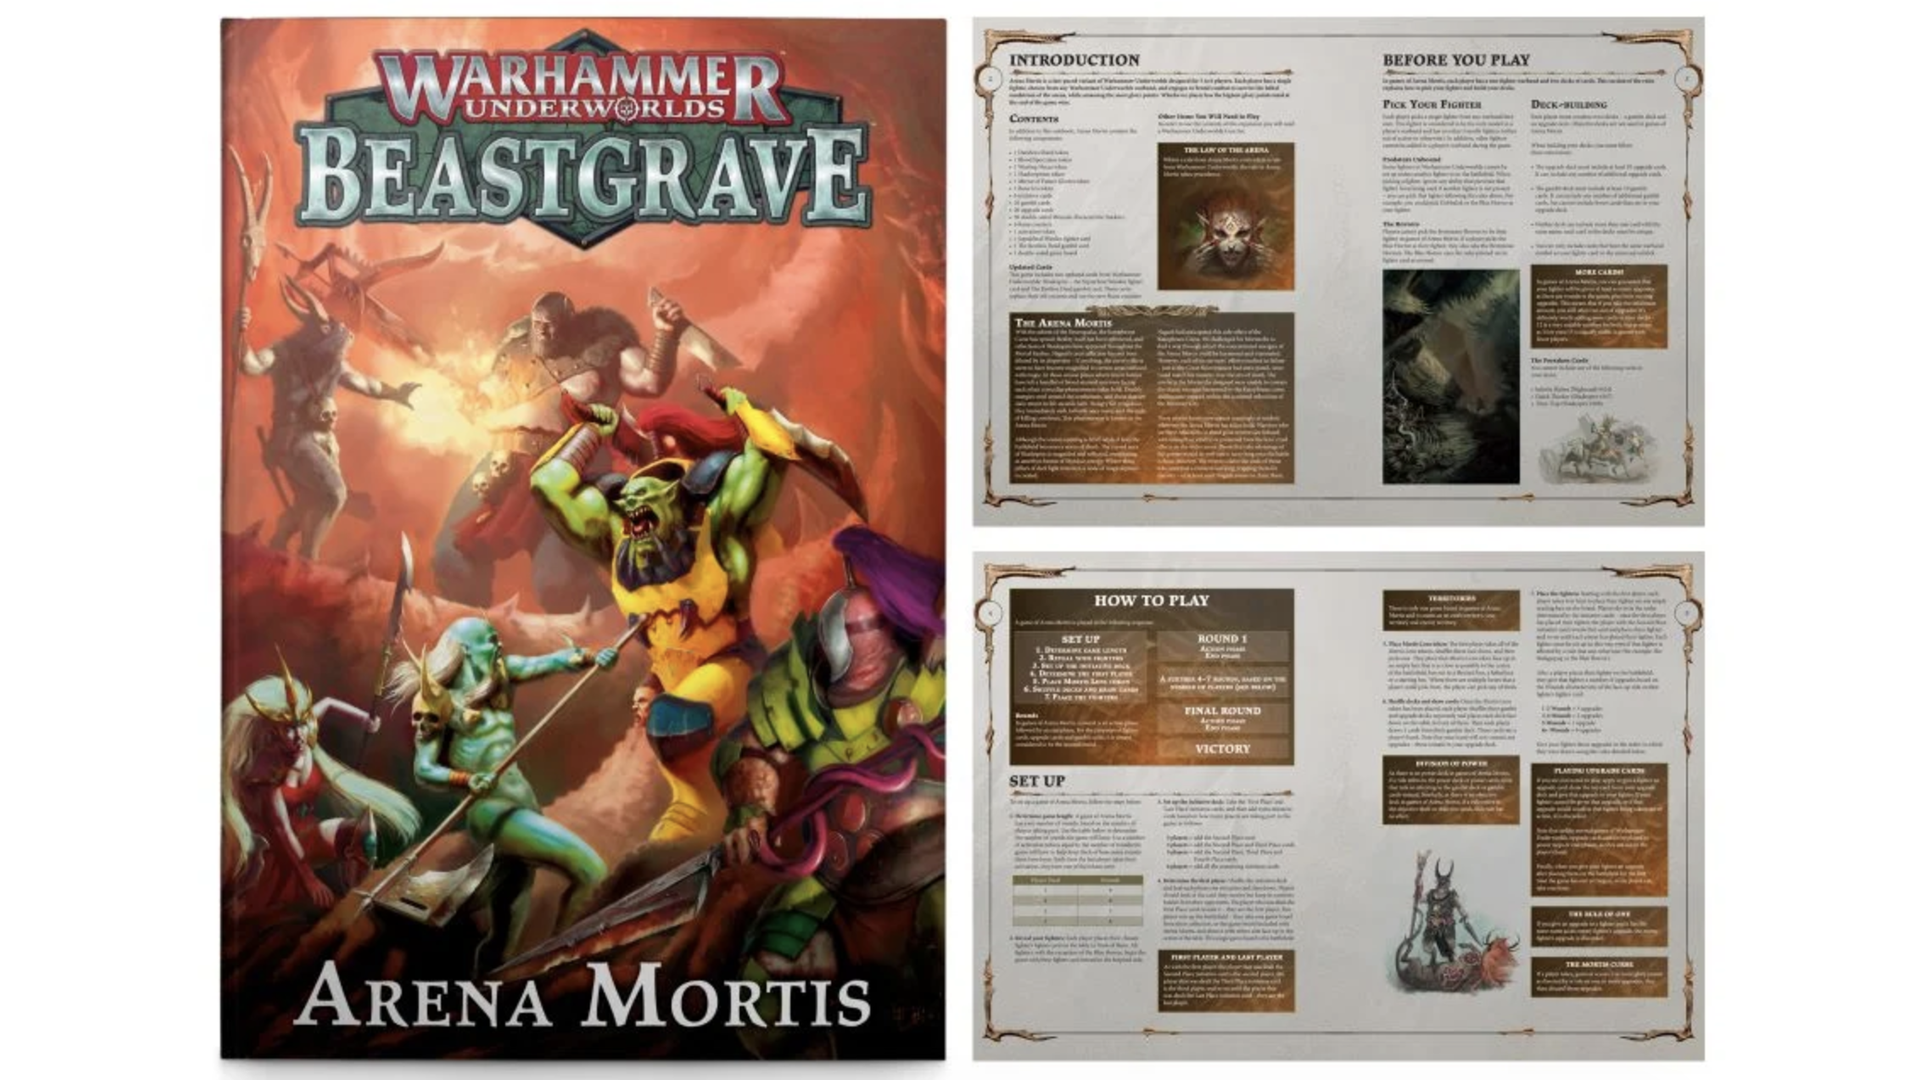 Image for Warhammer Underworlds expansion Arena Mortis adds a six-player free-for-all mode